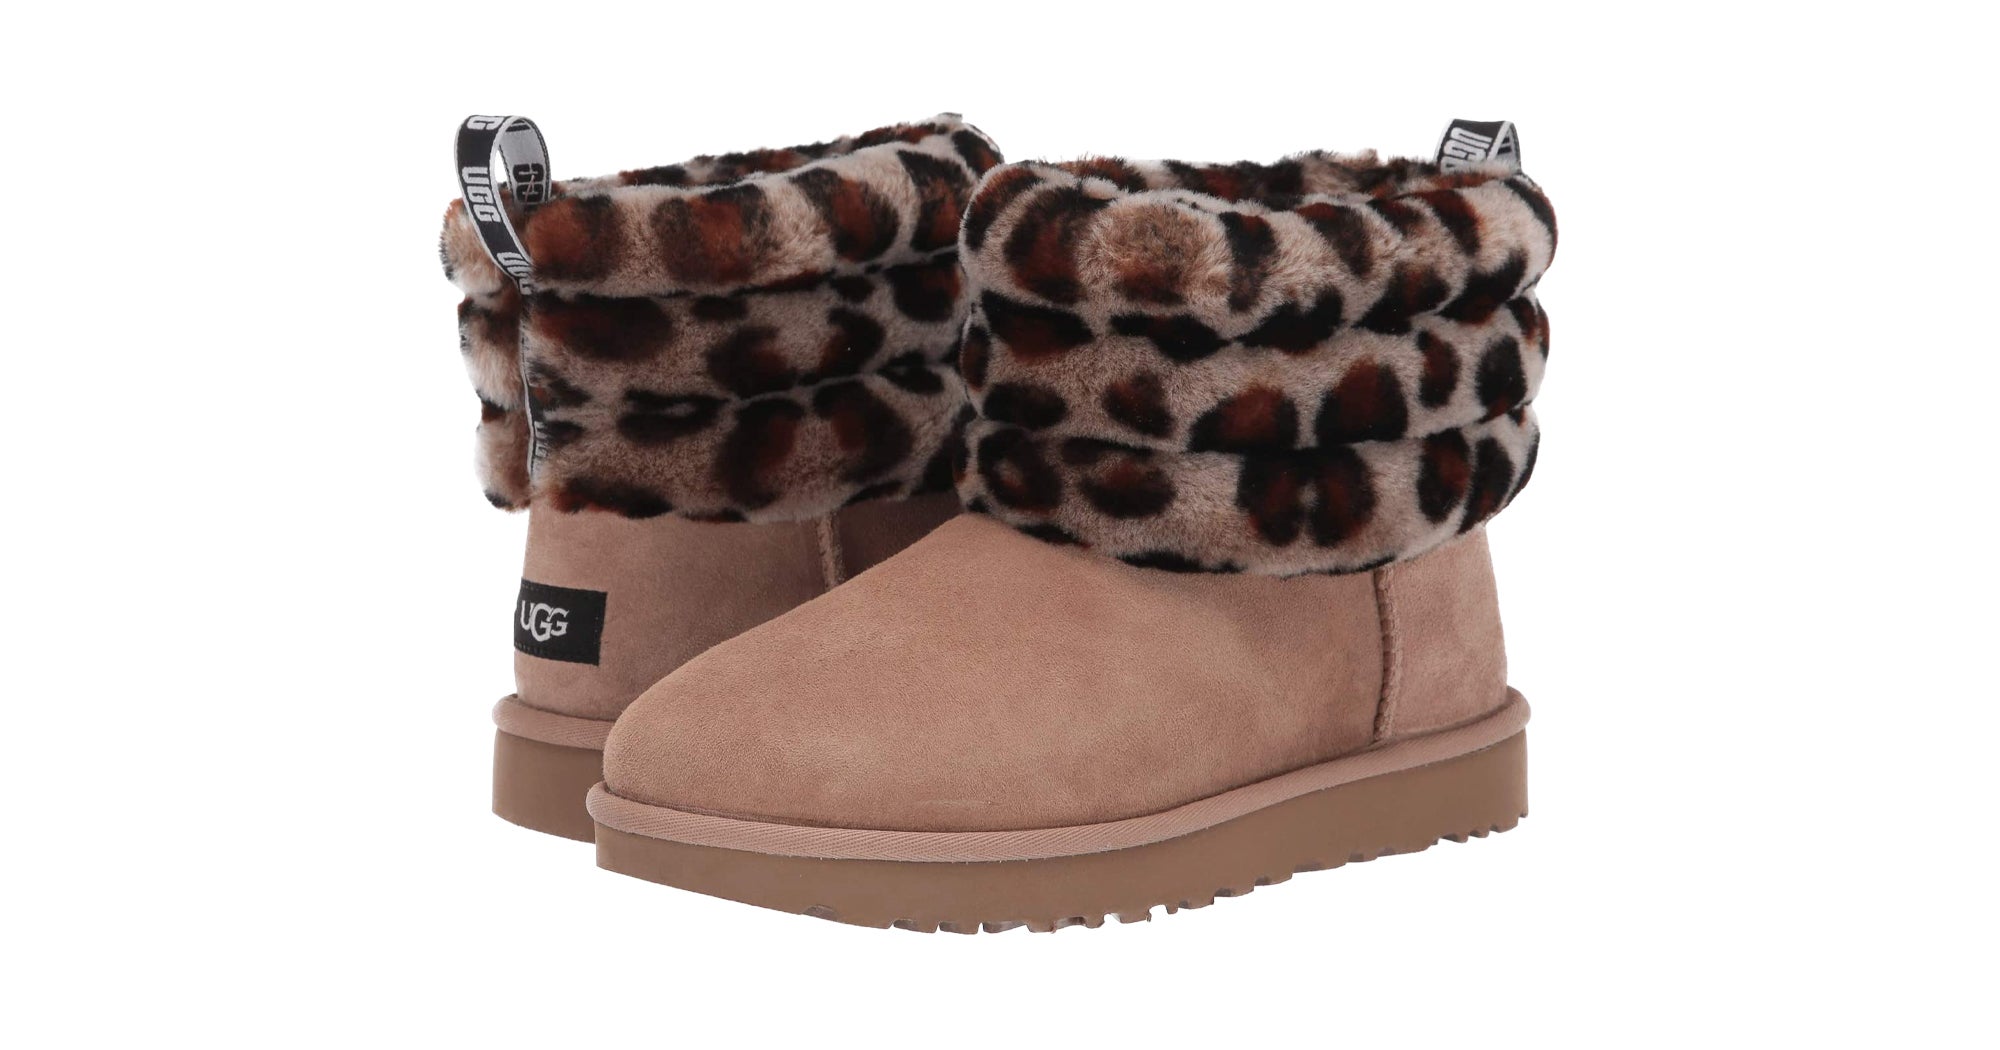 cyber monday deals on uggs